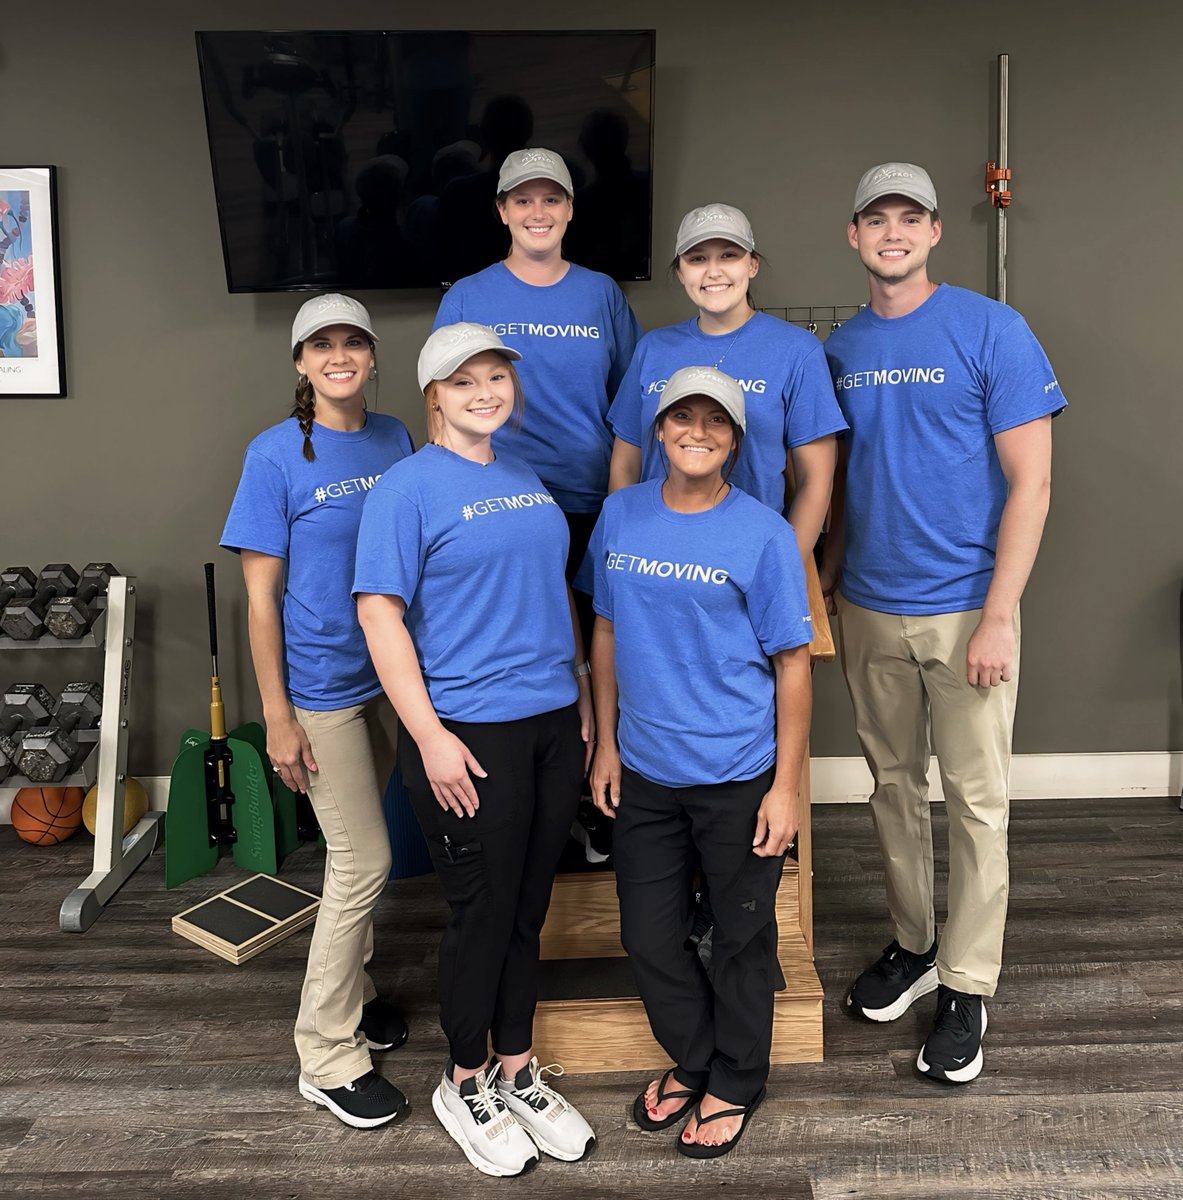 The PT Pros Leitchfield team is all smiles in their new tees and hats! 😎📷#PTPros #GetMoving #YourTeamIsHere #LeitchfieldKY